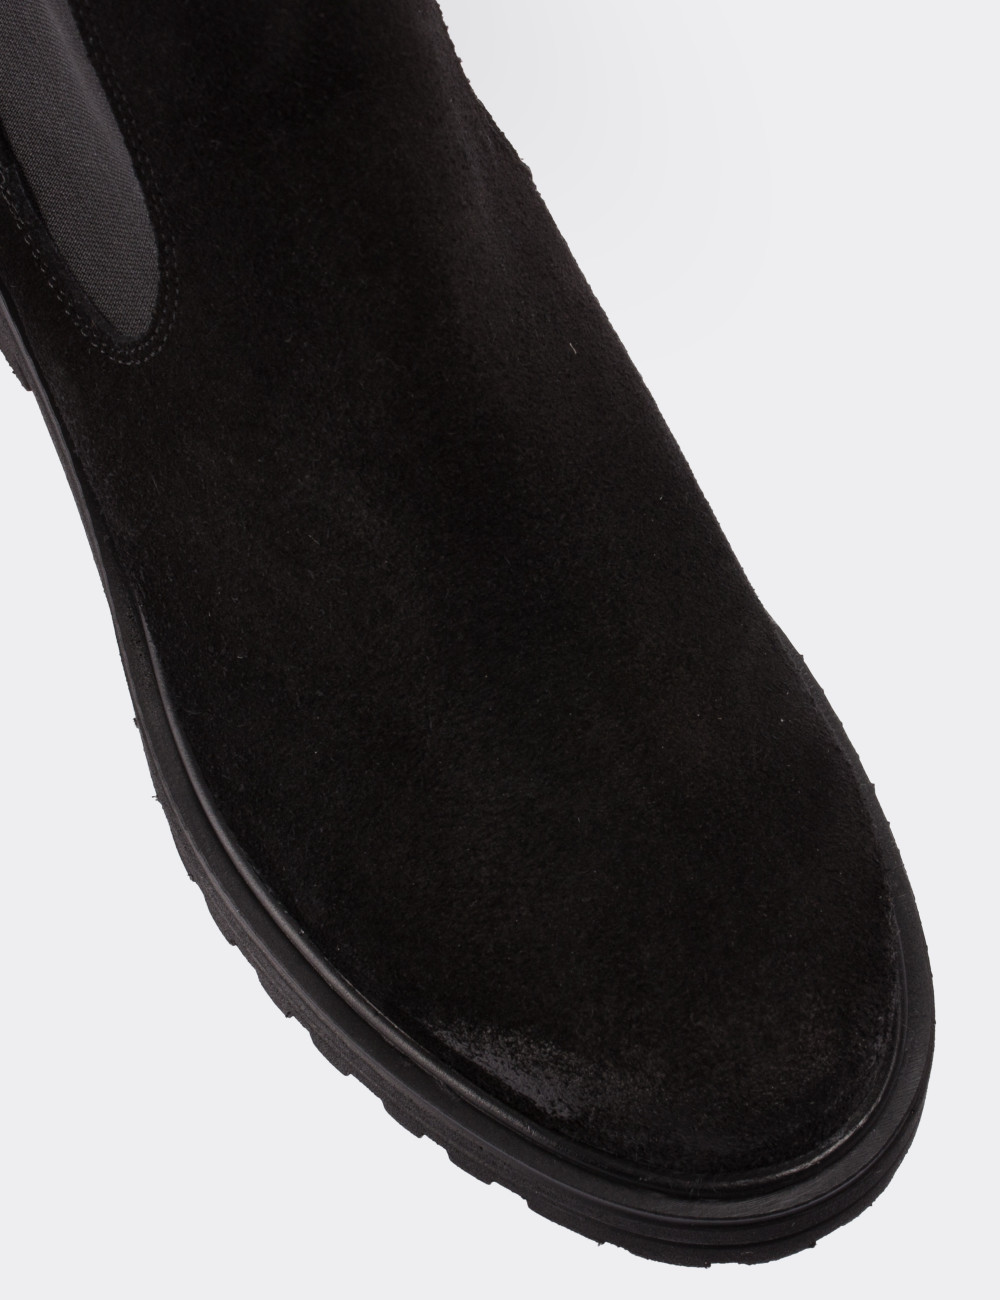 Black Suede Leather Boots - 01801ZSYHE01